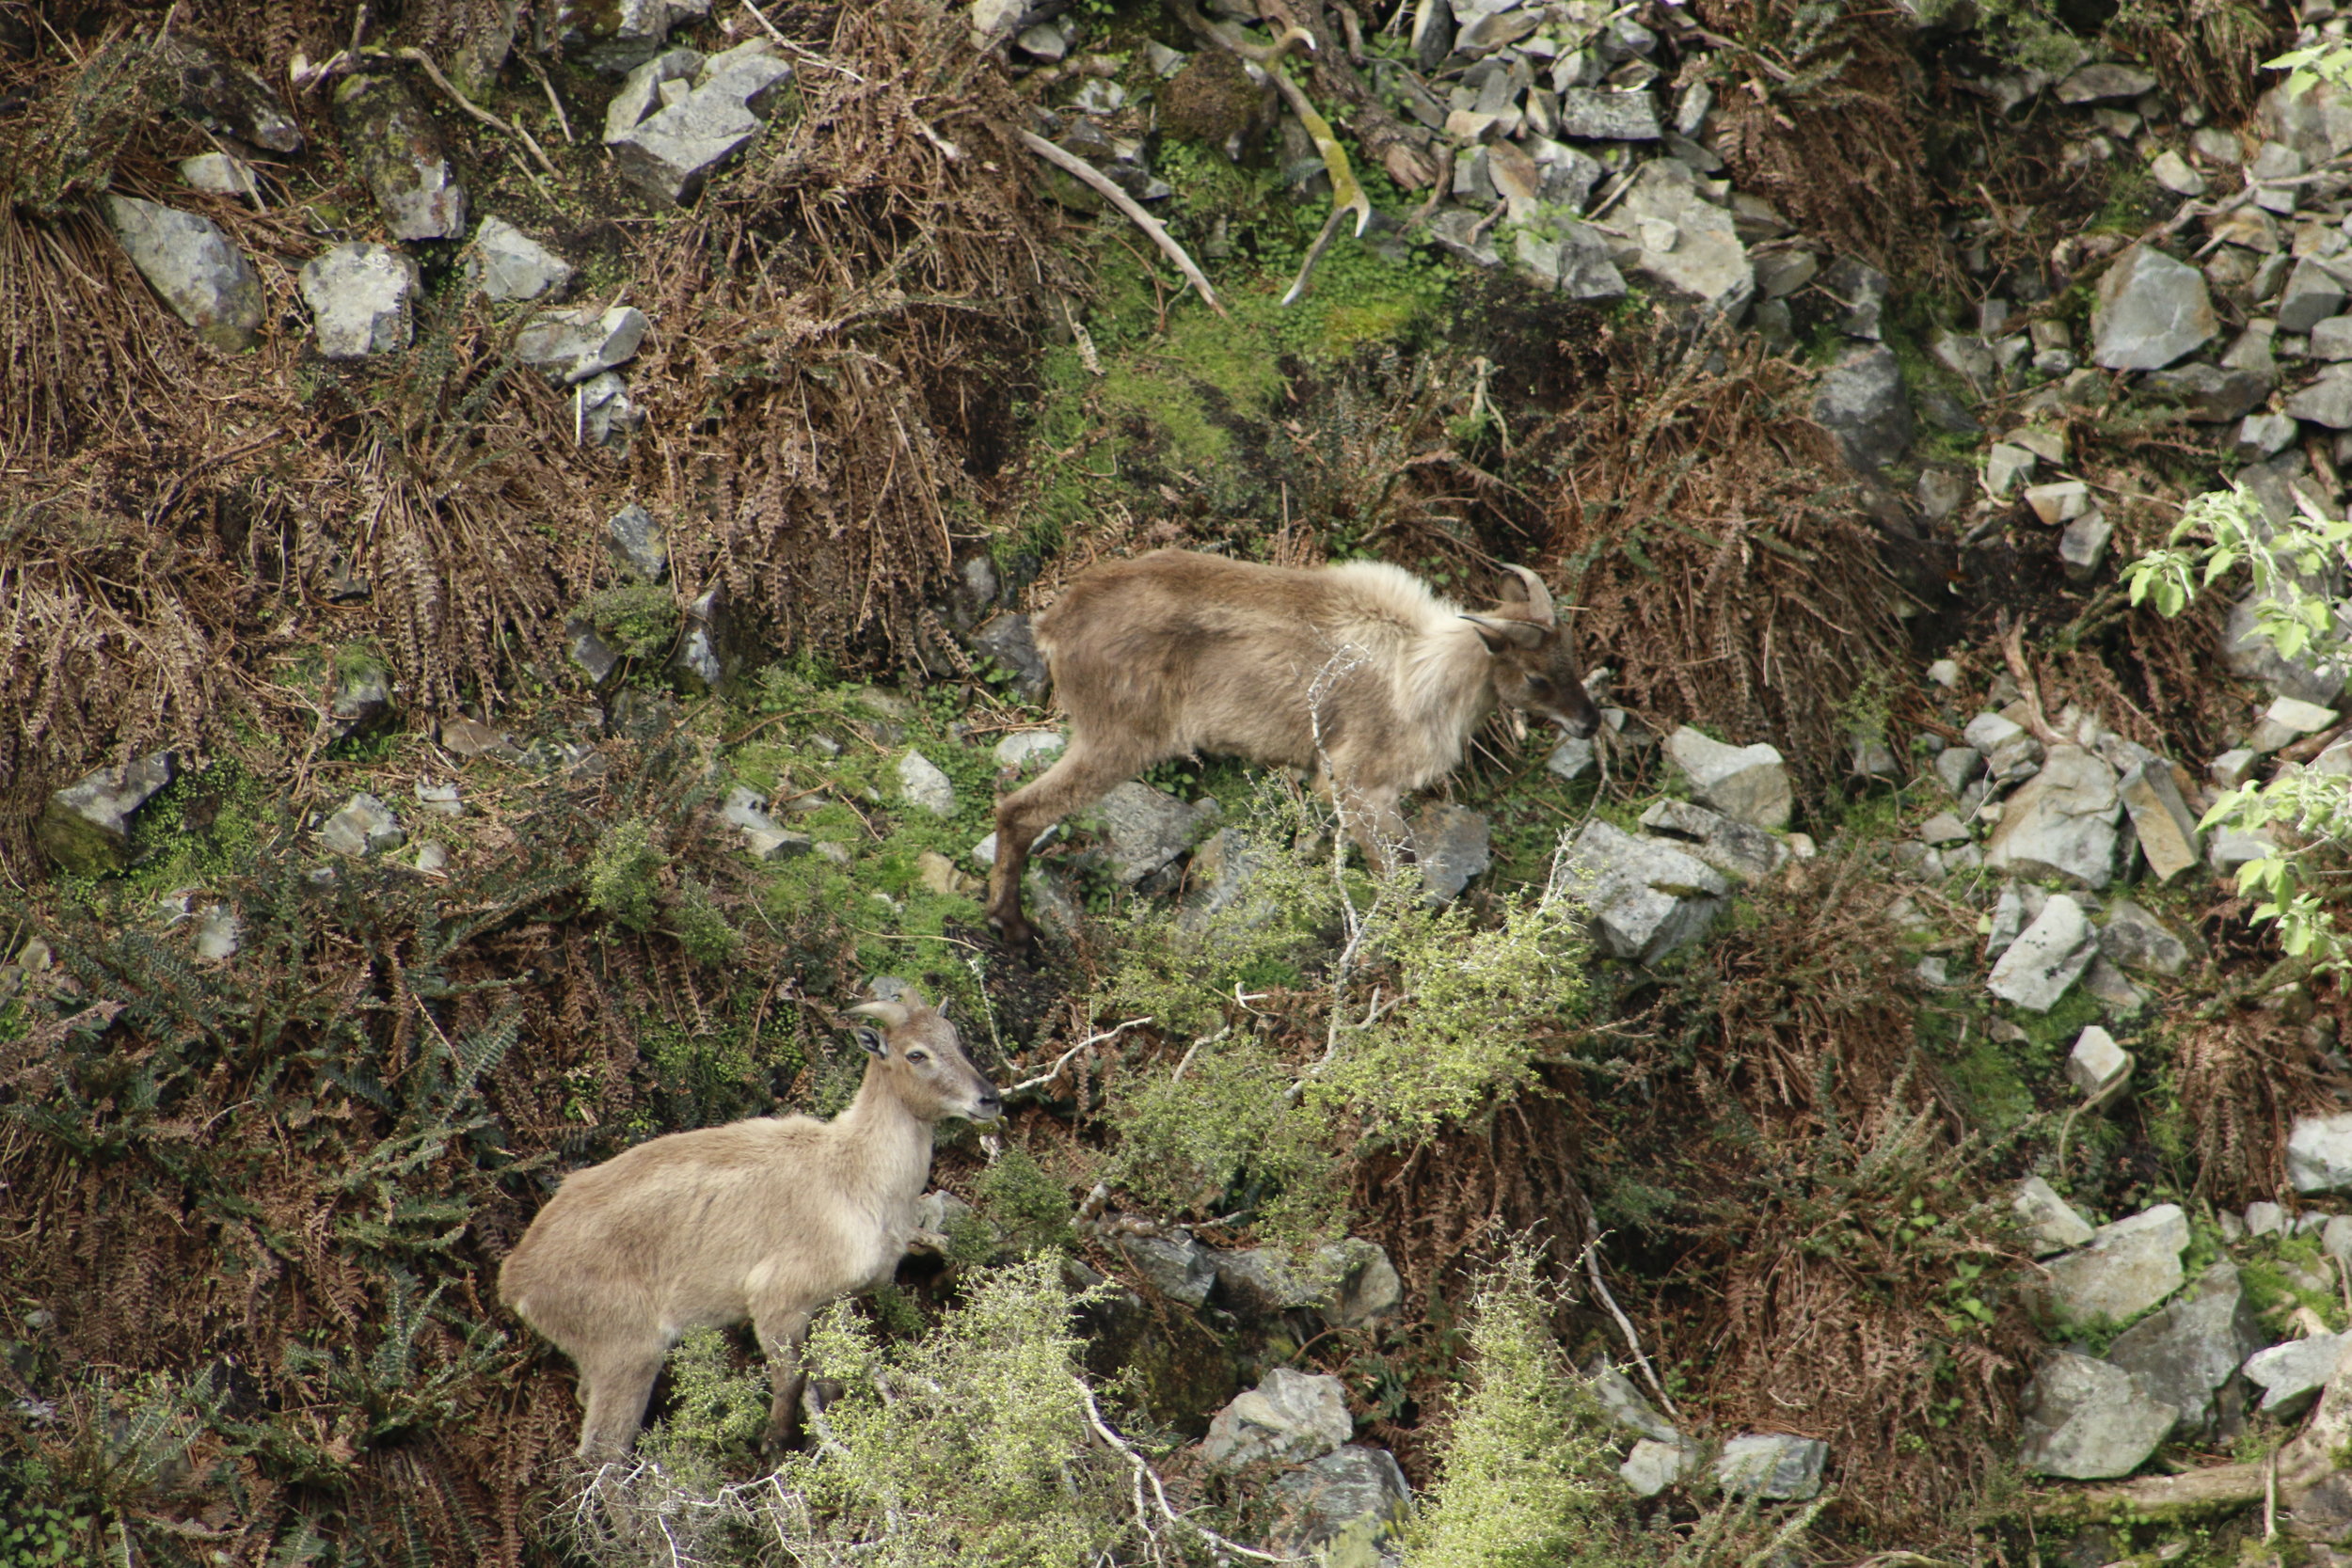  Tahr on a steep clearing in the scrub. 